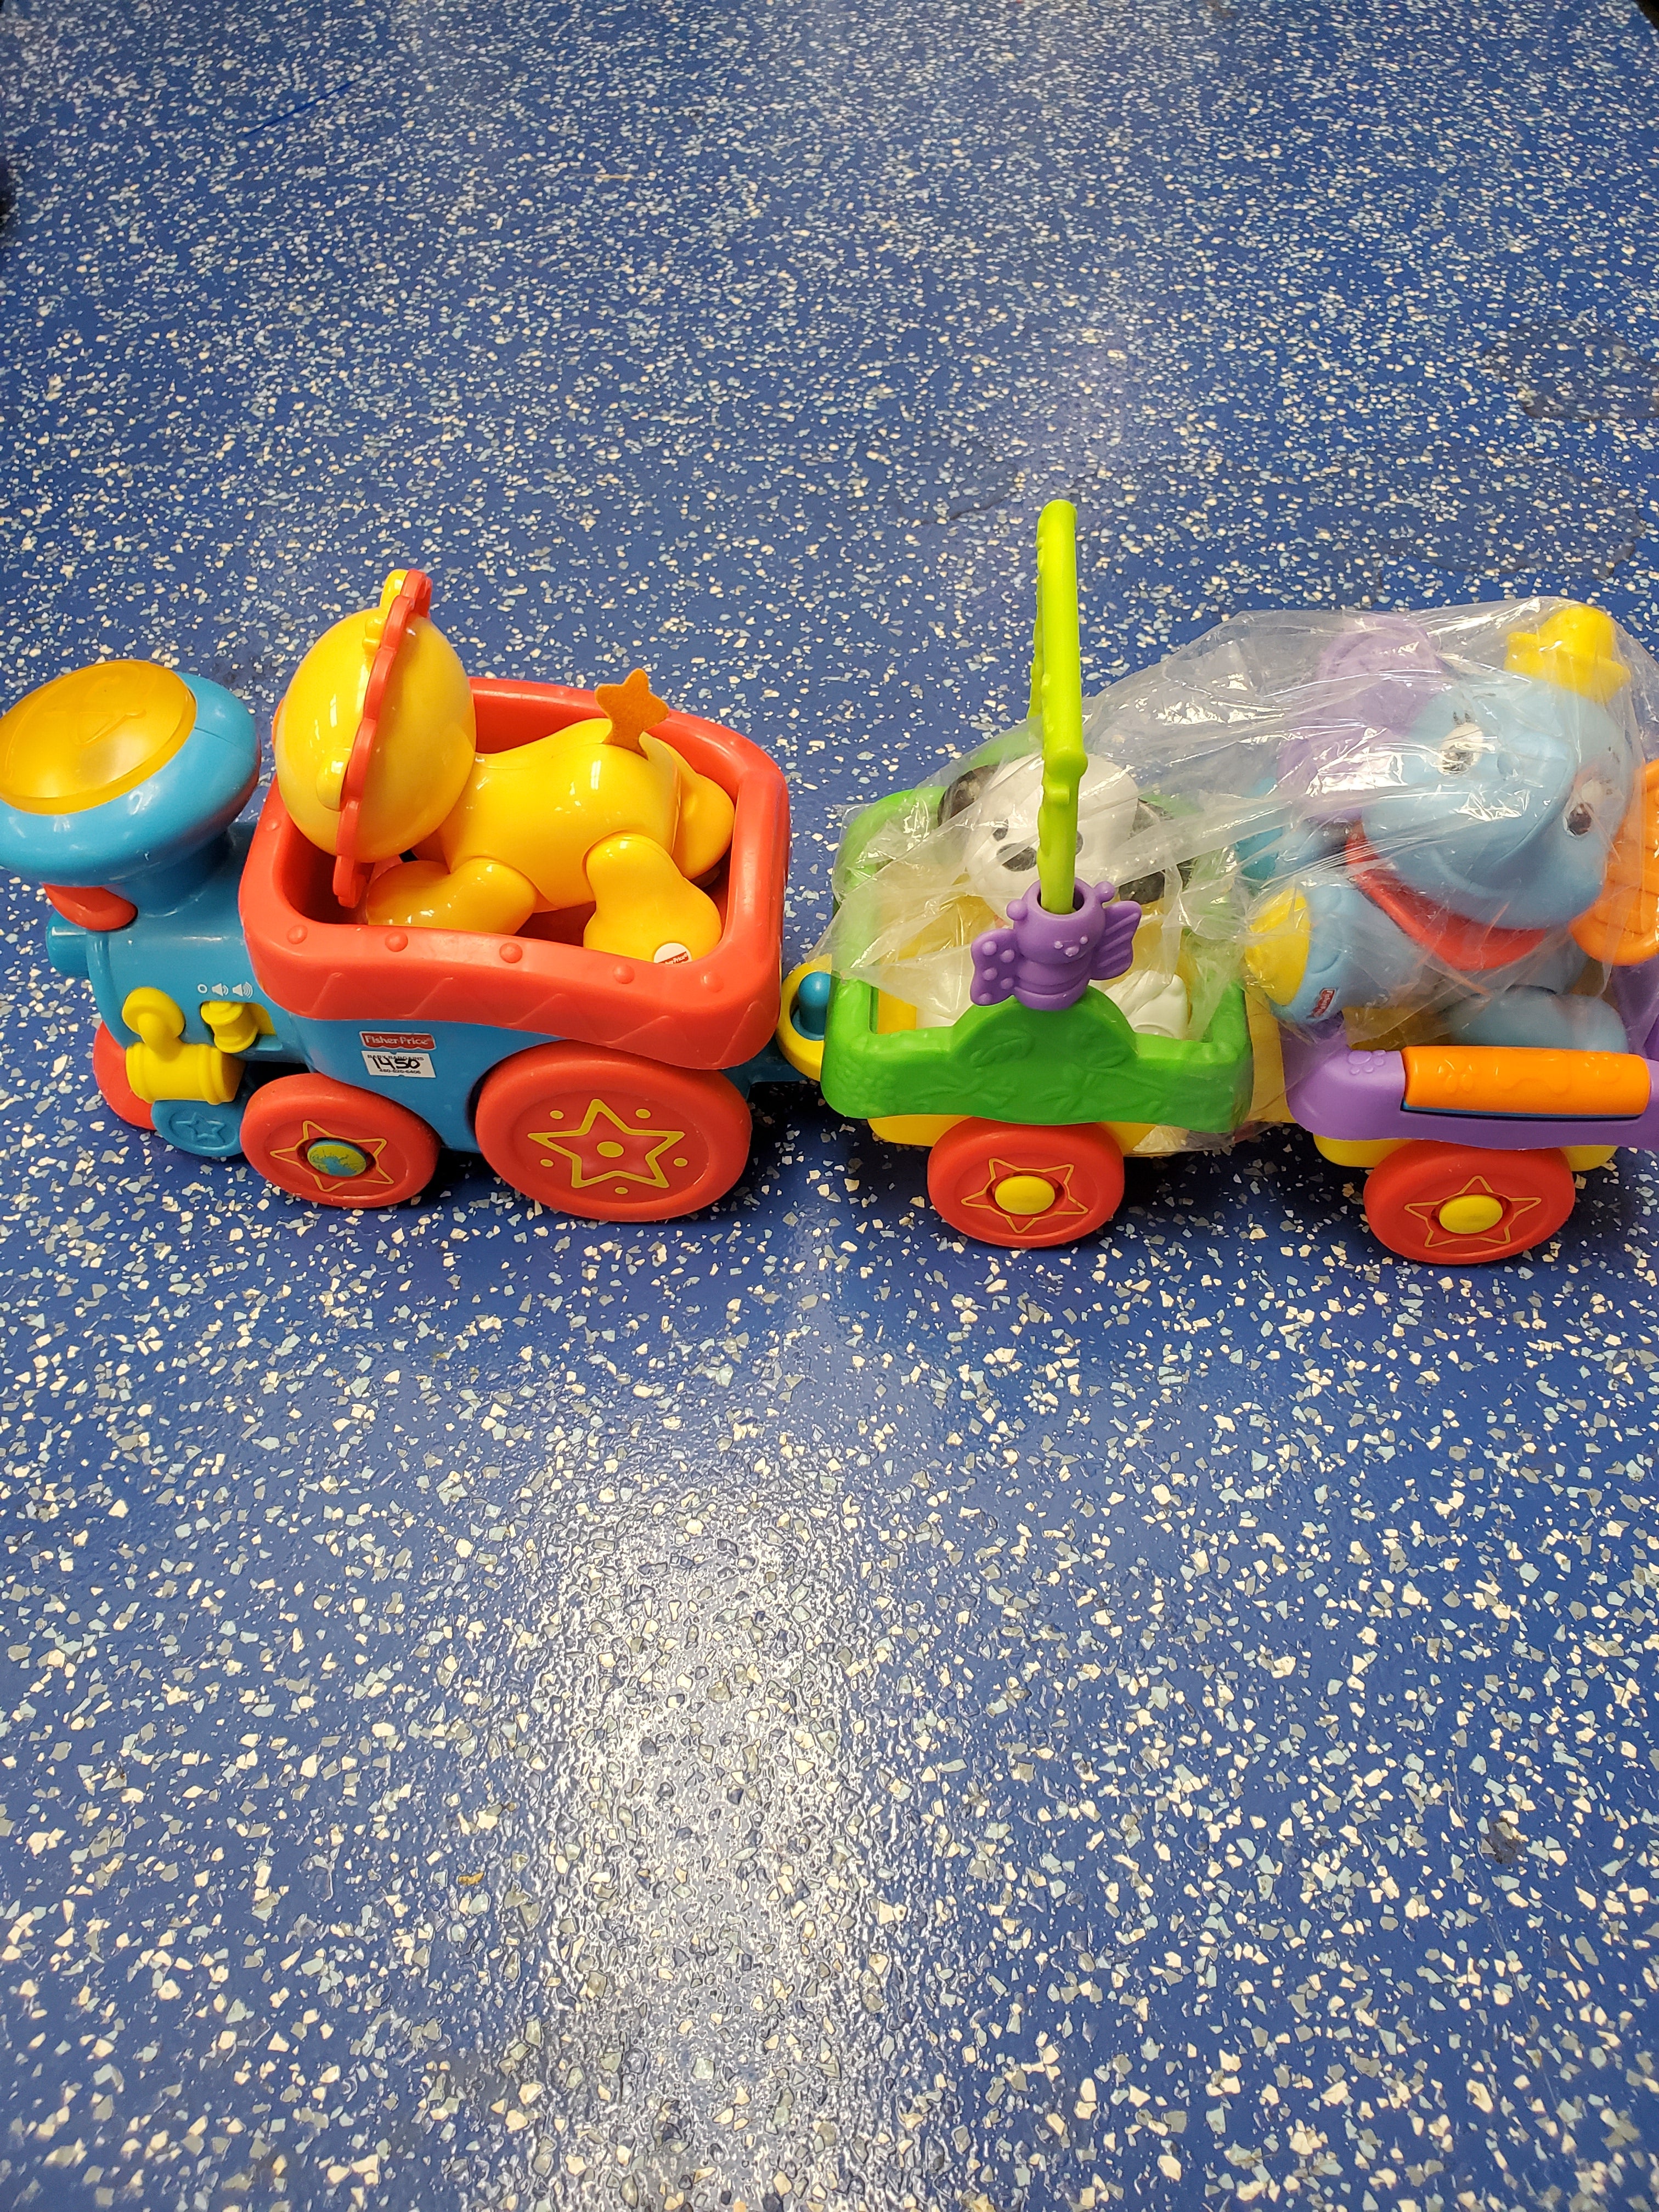 Fisher price engine and car/3 animals